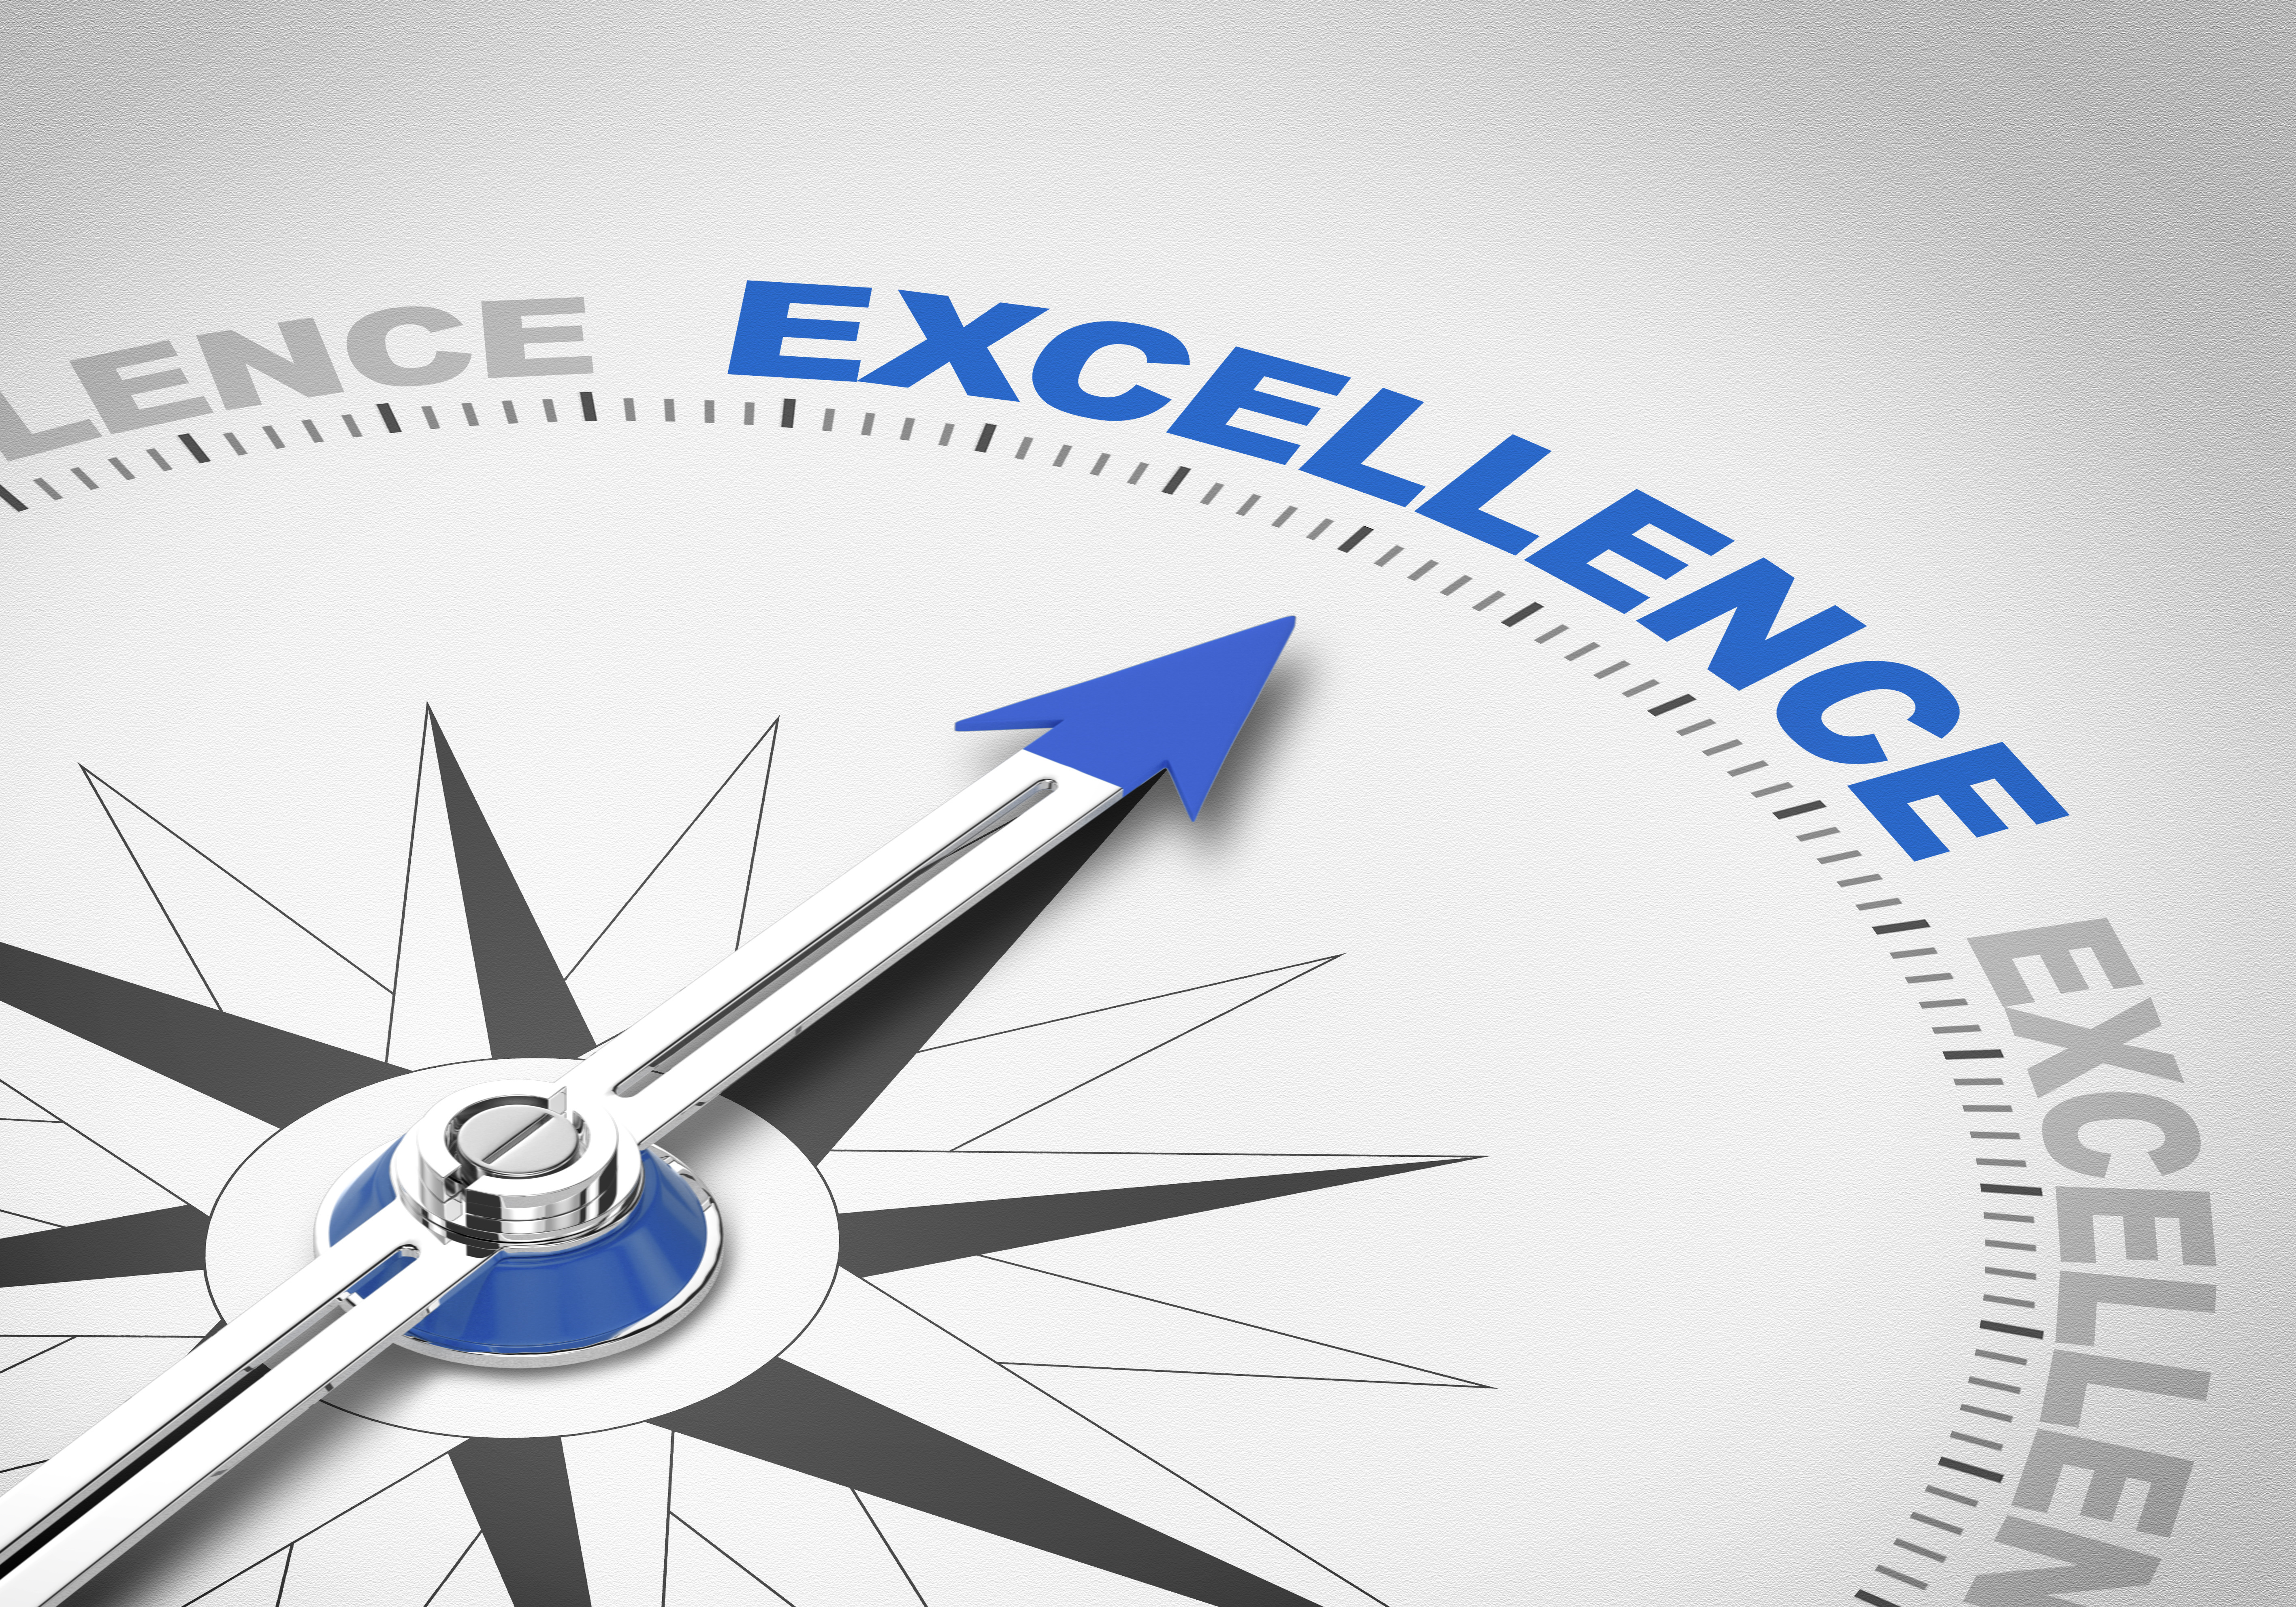 A compass pointint to the word 'Excellence'